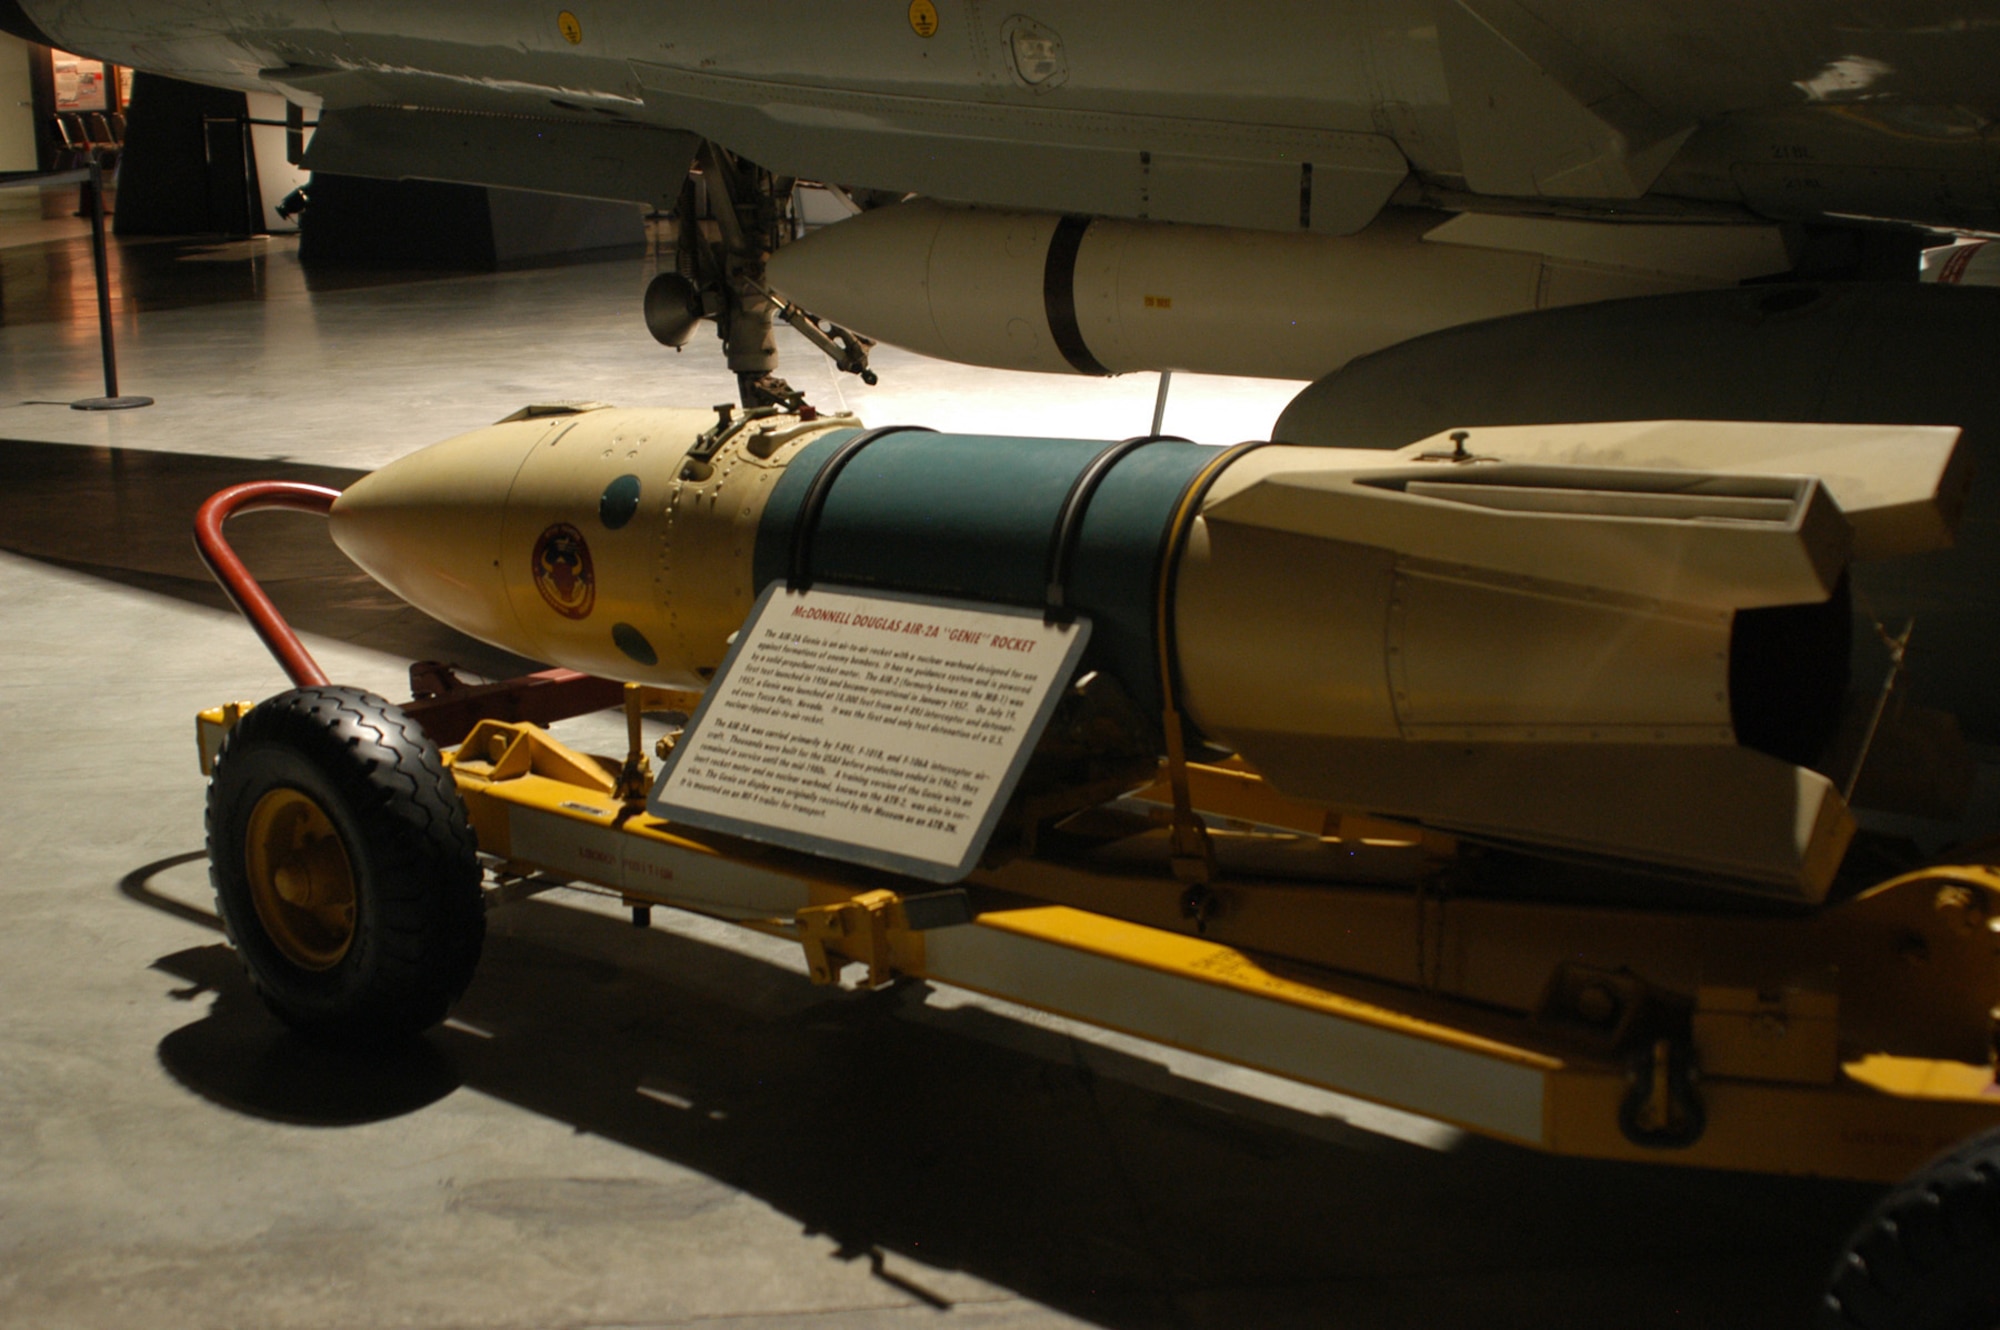 V-2 Rocket > National Museum of the United States Air Force™ > Display